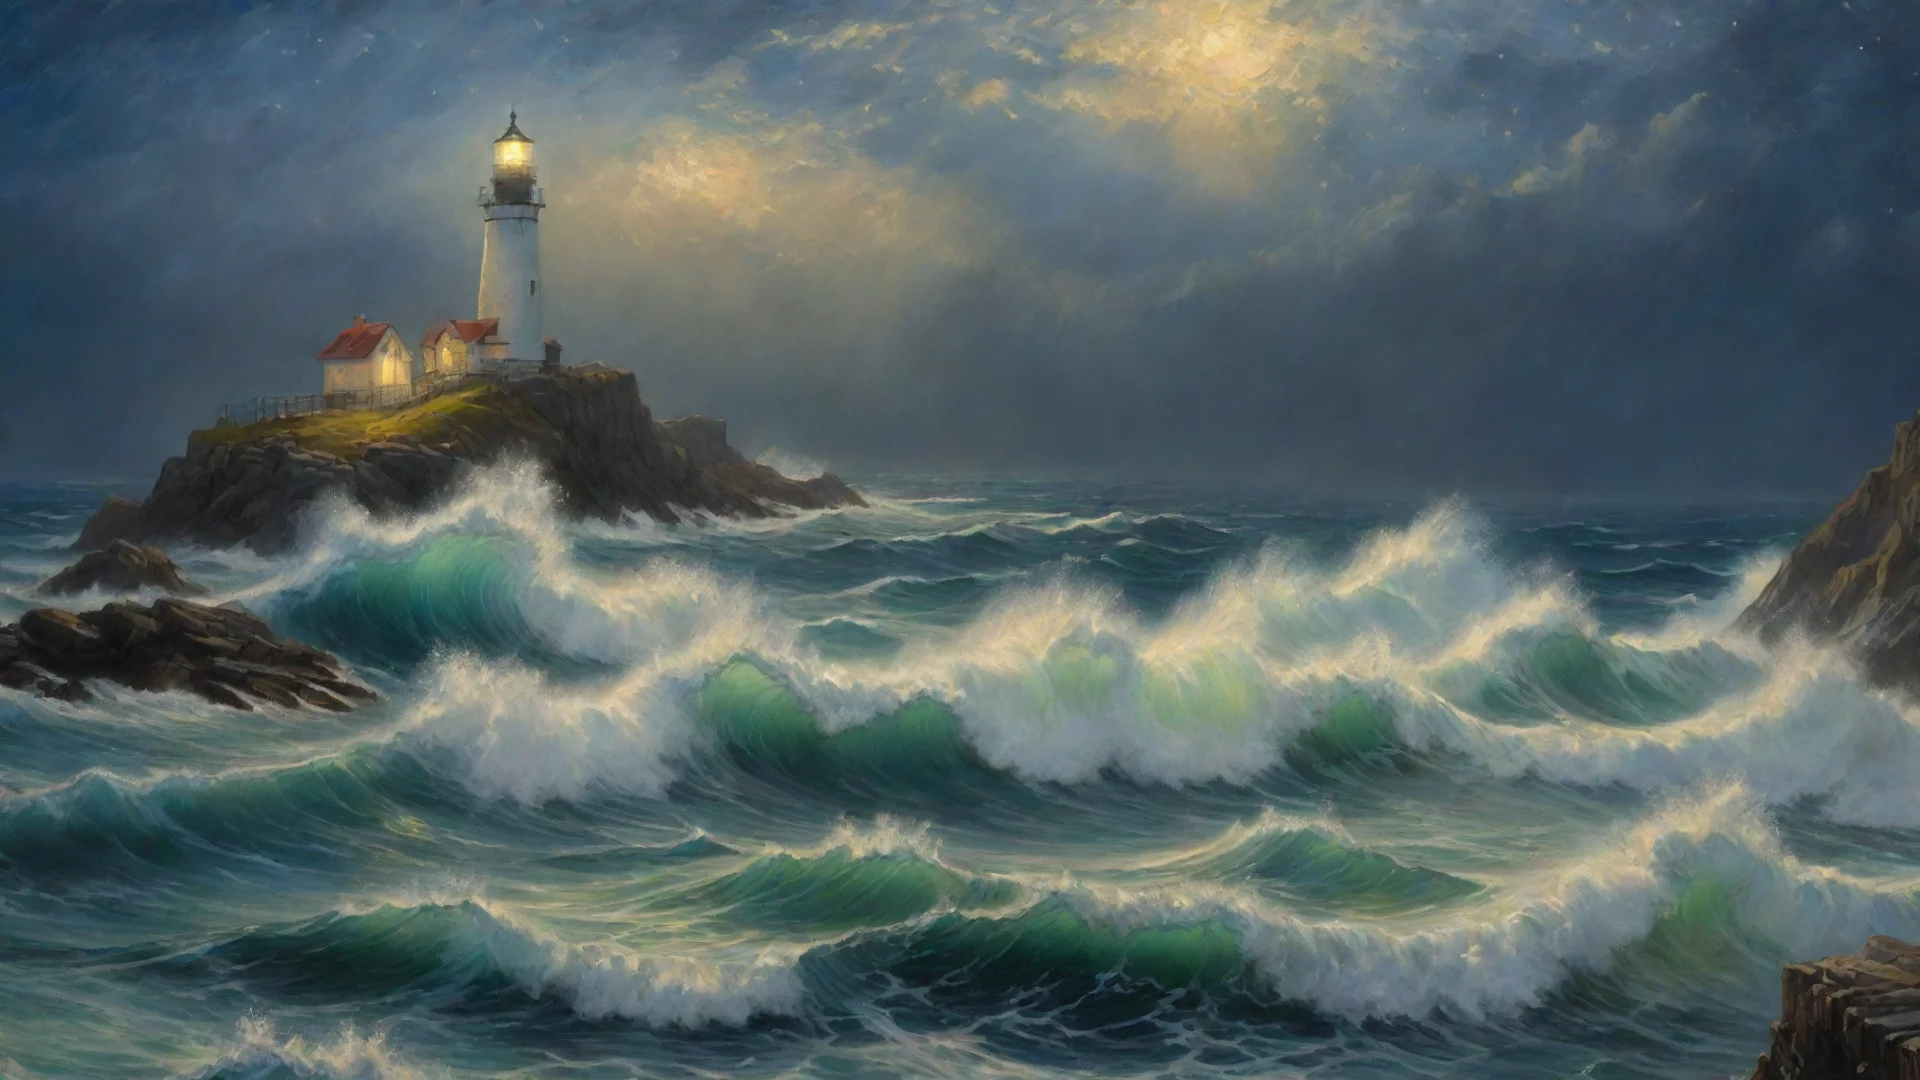 artstation art painting of waves crashing against tallrocks  lighthouse  dramatic lighting van gogh starry night magical atmosphere by renato muccillo a confident engaging wow 3 wide